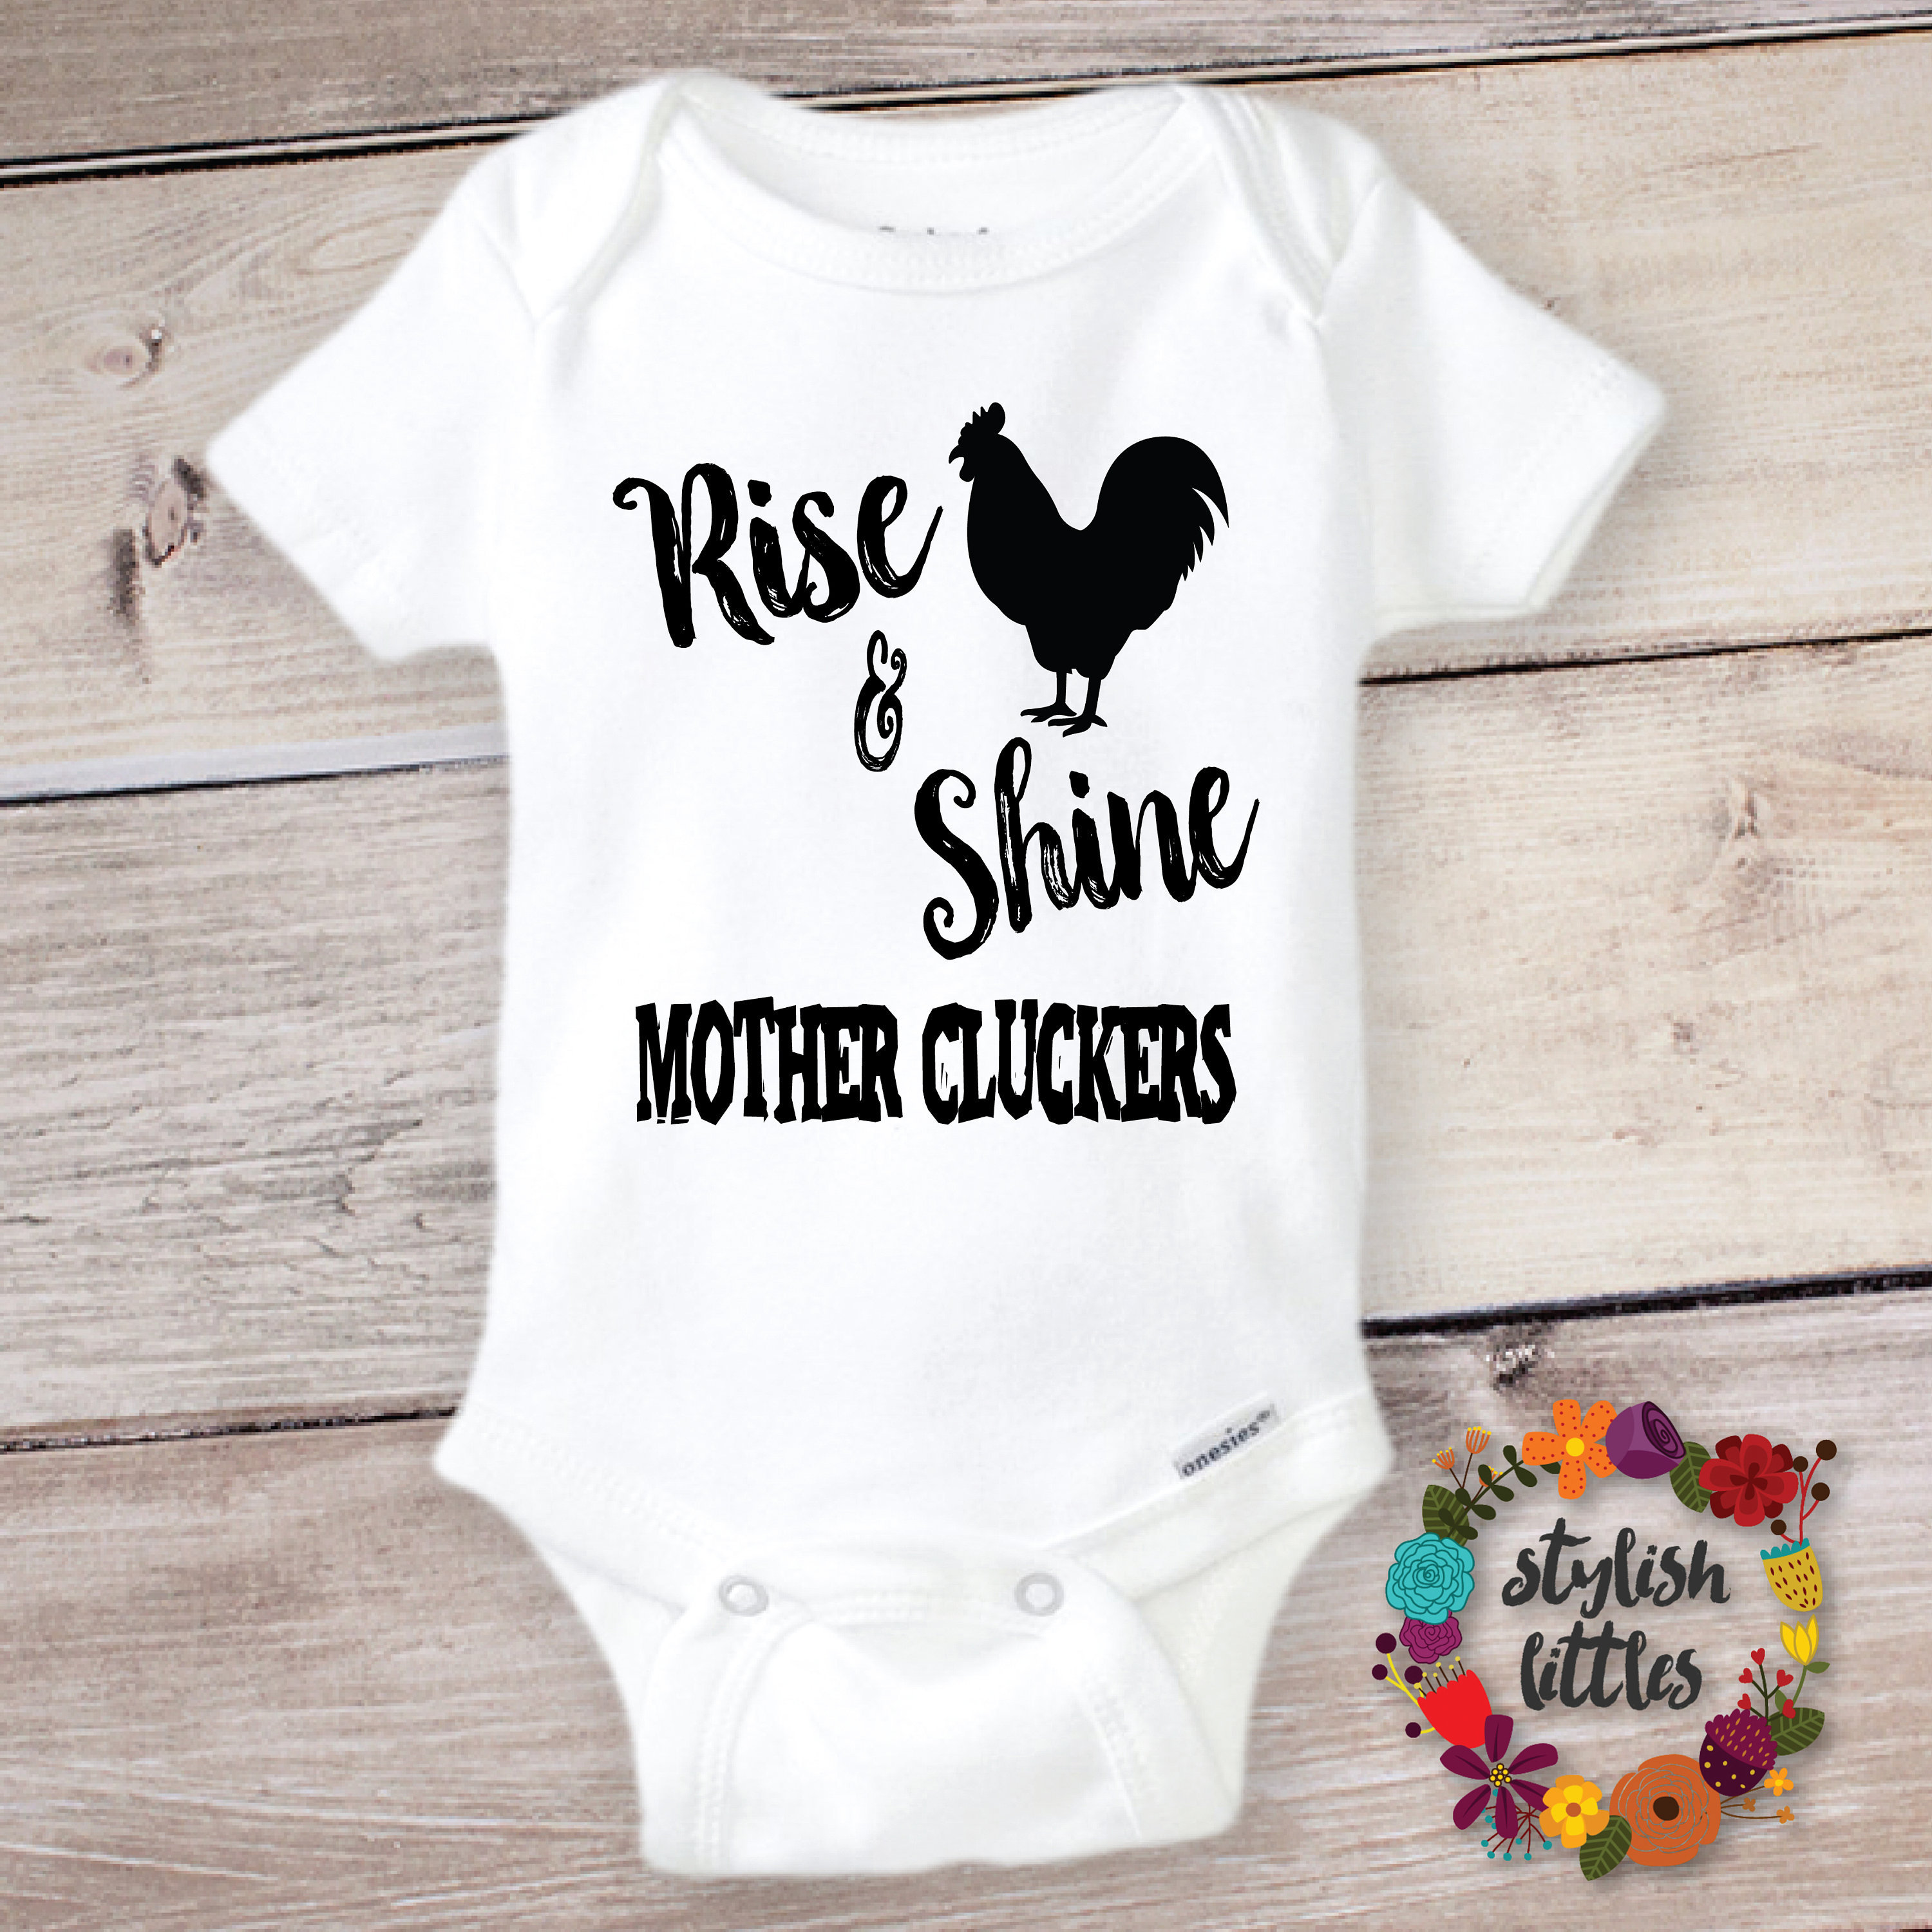 Cow Baby Boy Shower Gift - Country Baby Clothes - Rooster Rise and Shine Mother Cluckers Onesie - Baby Boy Farm Onesie 12 Months